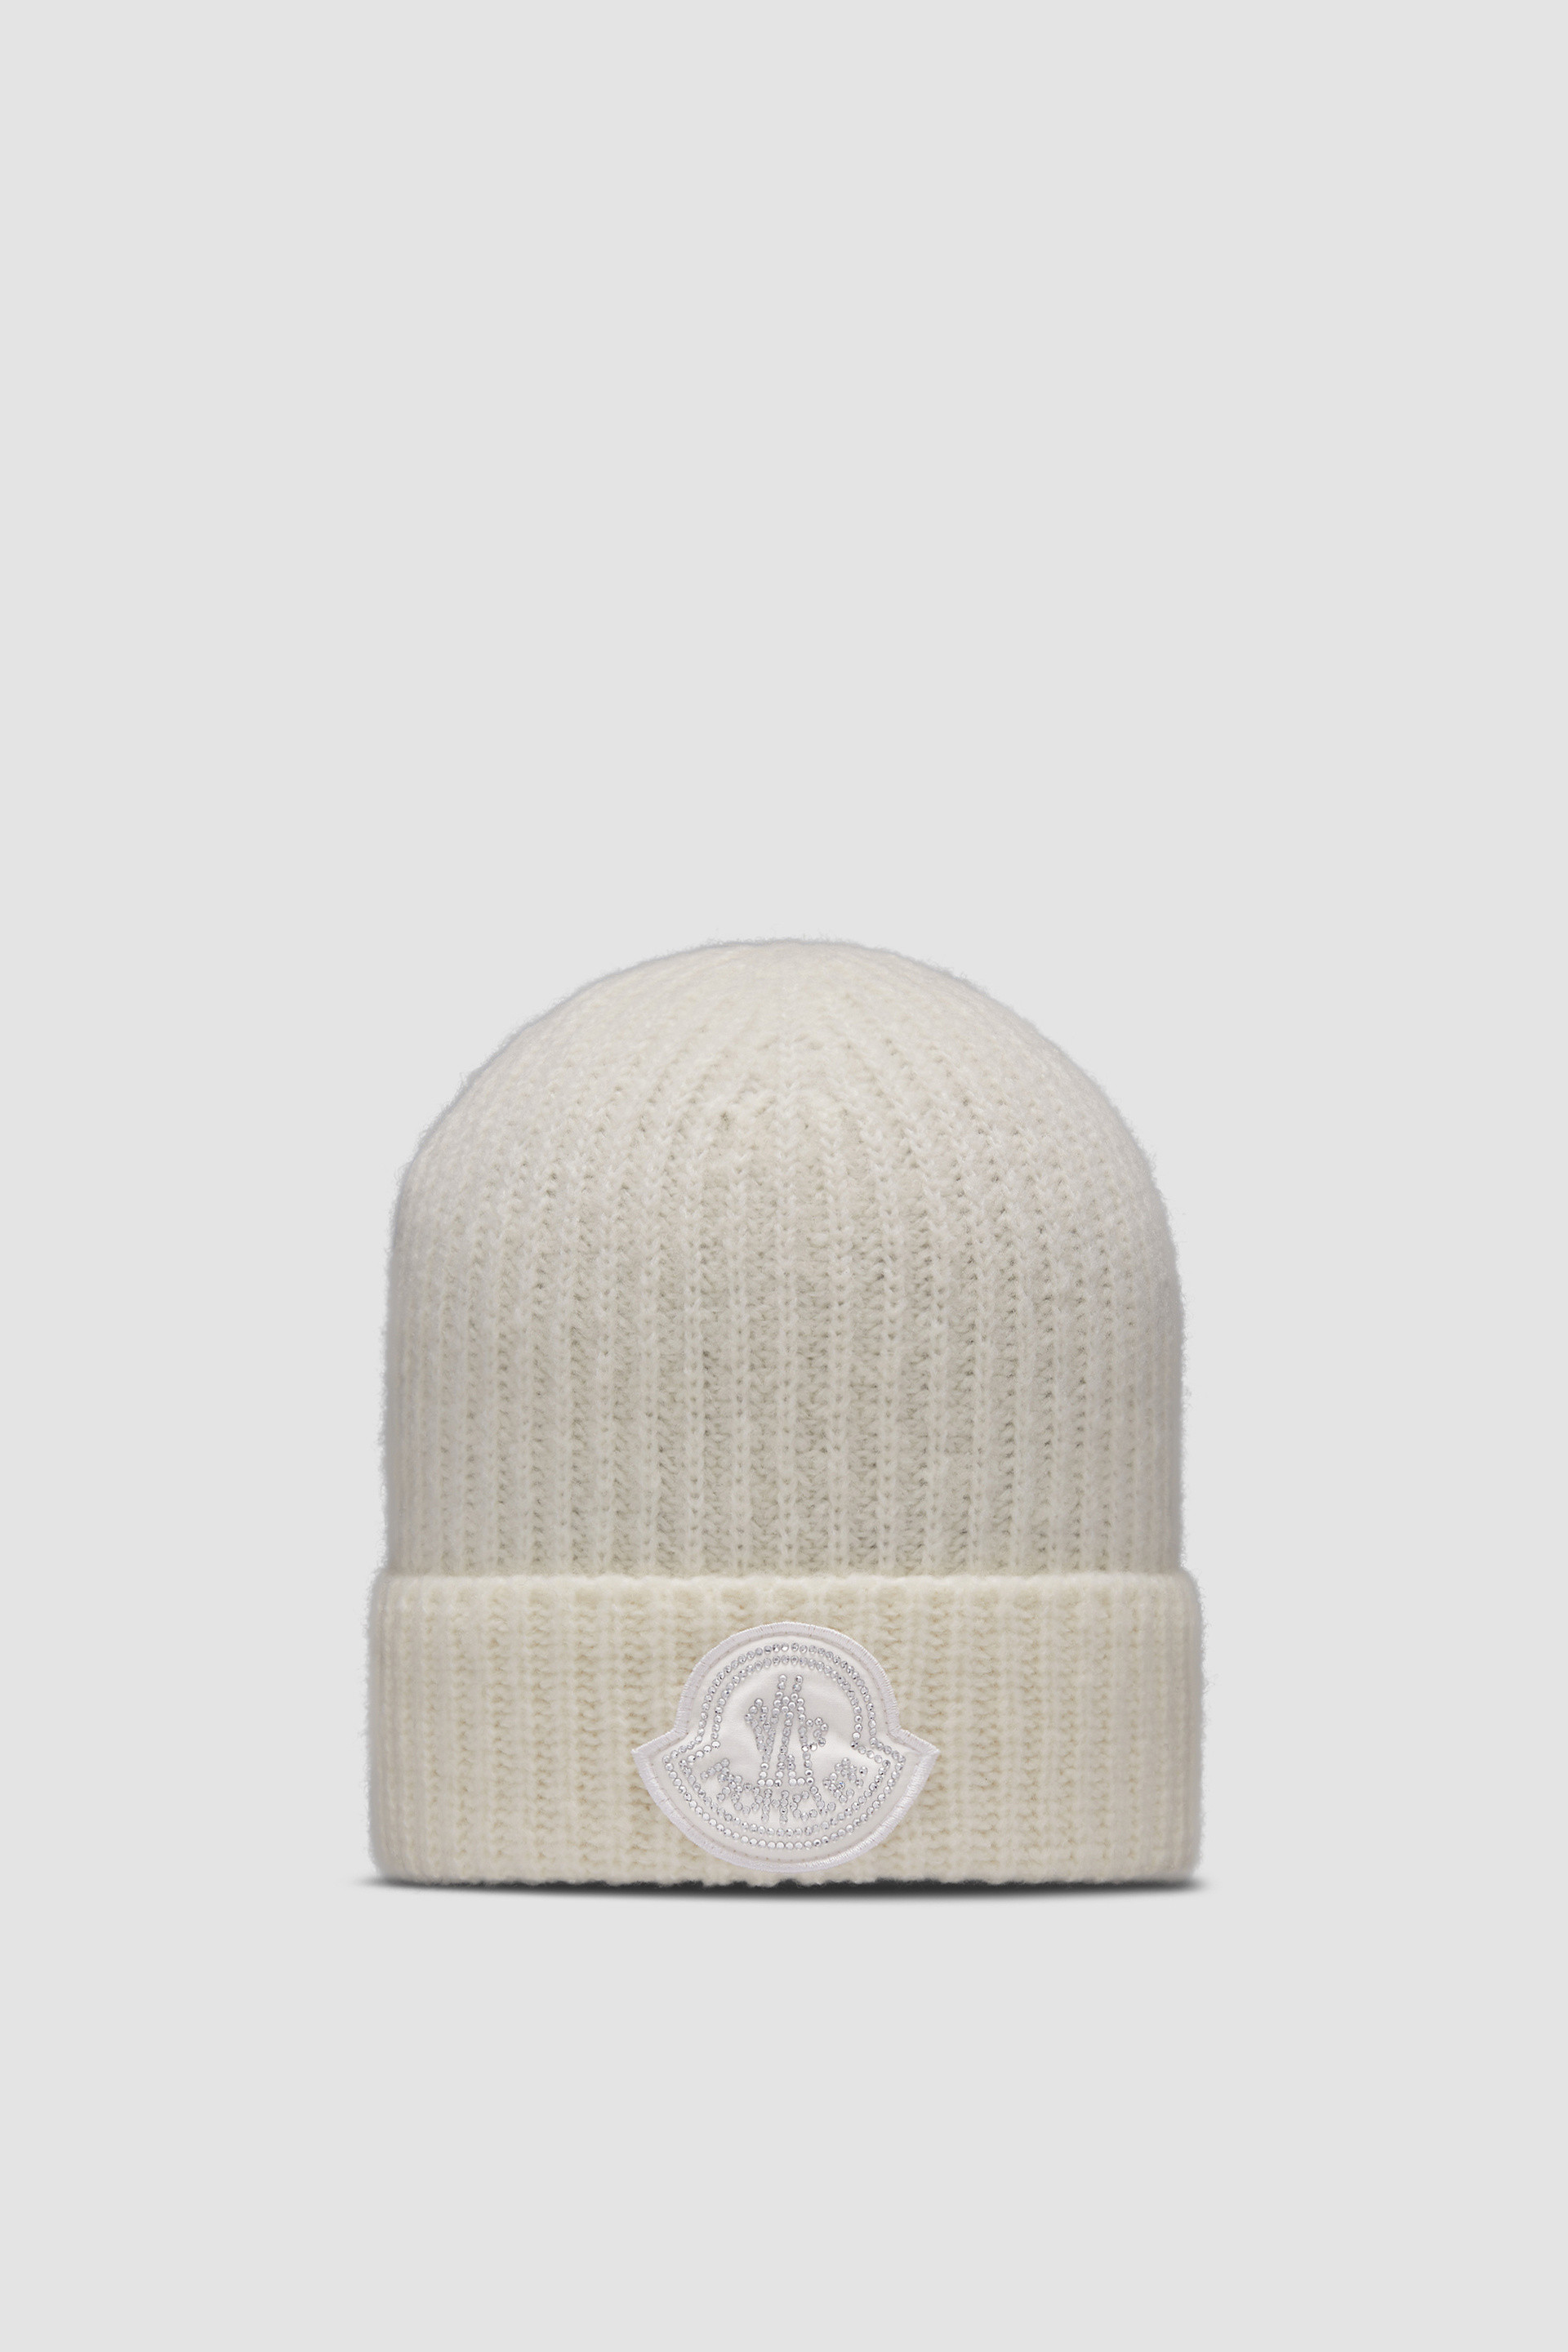 NEW MONCLER BRIGHT CORAL WOOL POM POM BEANIE LOGO HAT ONE SIZE RFID CODE